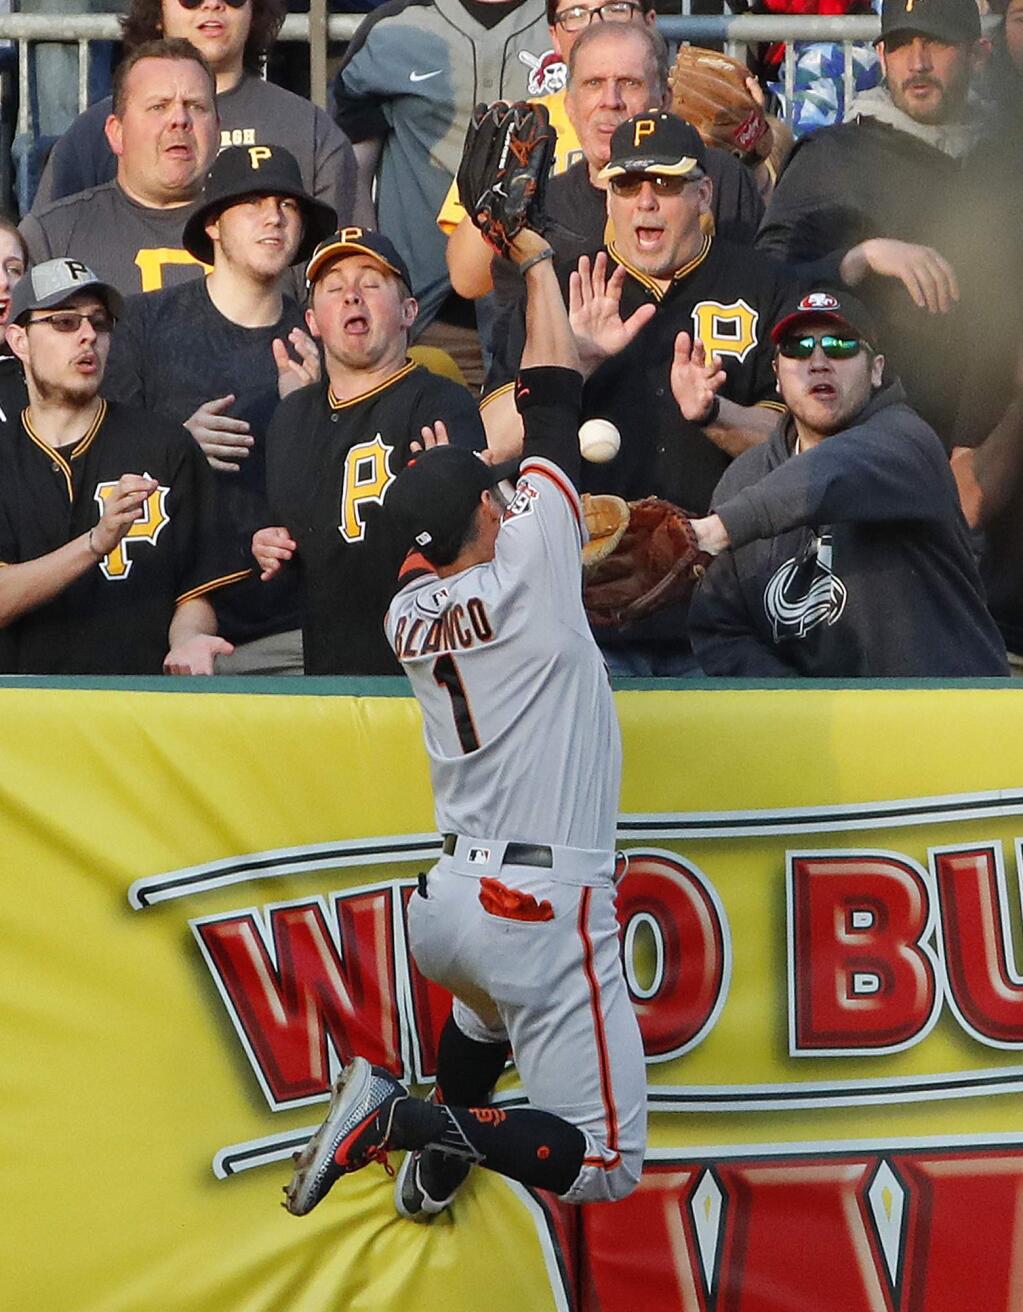 San Francisco Giants left fielder Gregor Blanco (1) leaps for but cannot come up with a two-run home run by Pittsburgh Pirates' Starling Marte in the first inning of a baseball game in Pittsburgh, Friday, May 11, 2018. (AP Photo/Gene J. Puskar)